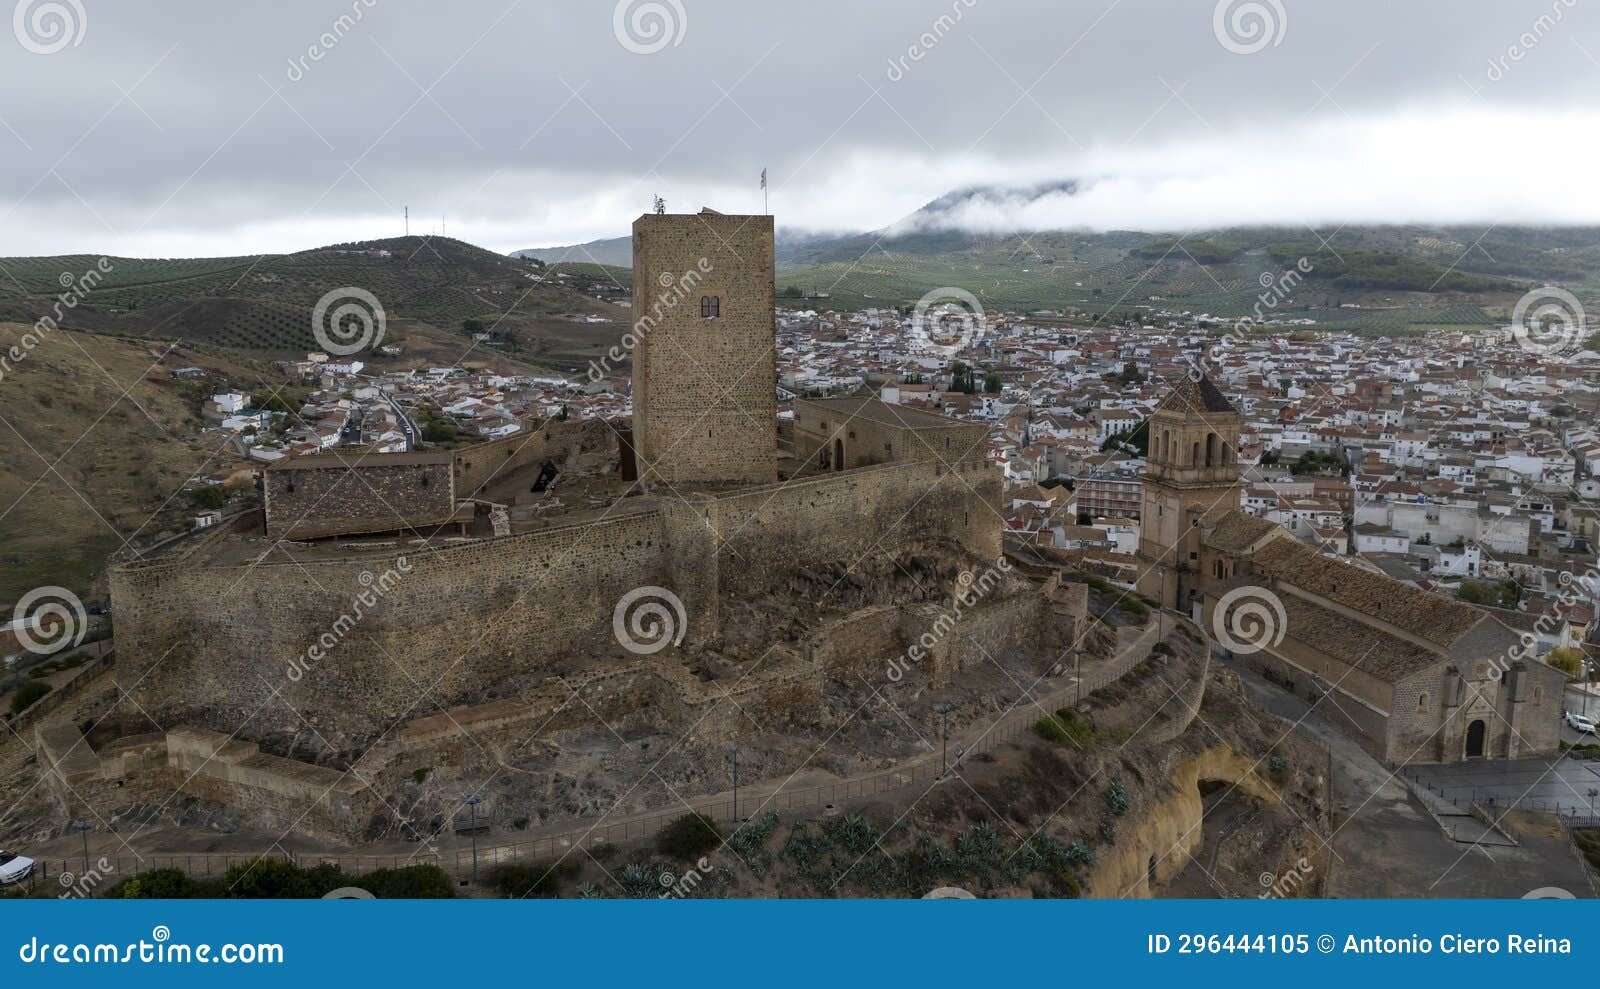 aerial view of the castle of alcaudete in the province of jaÃ©n, andalusia